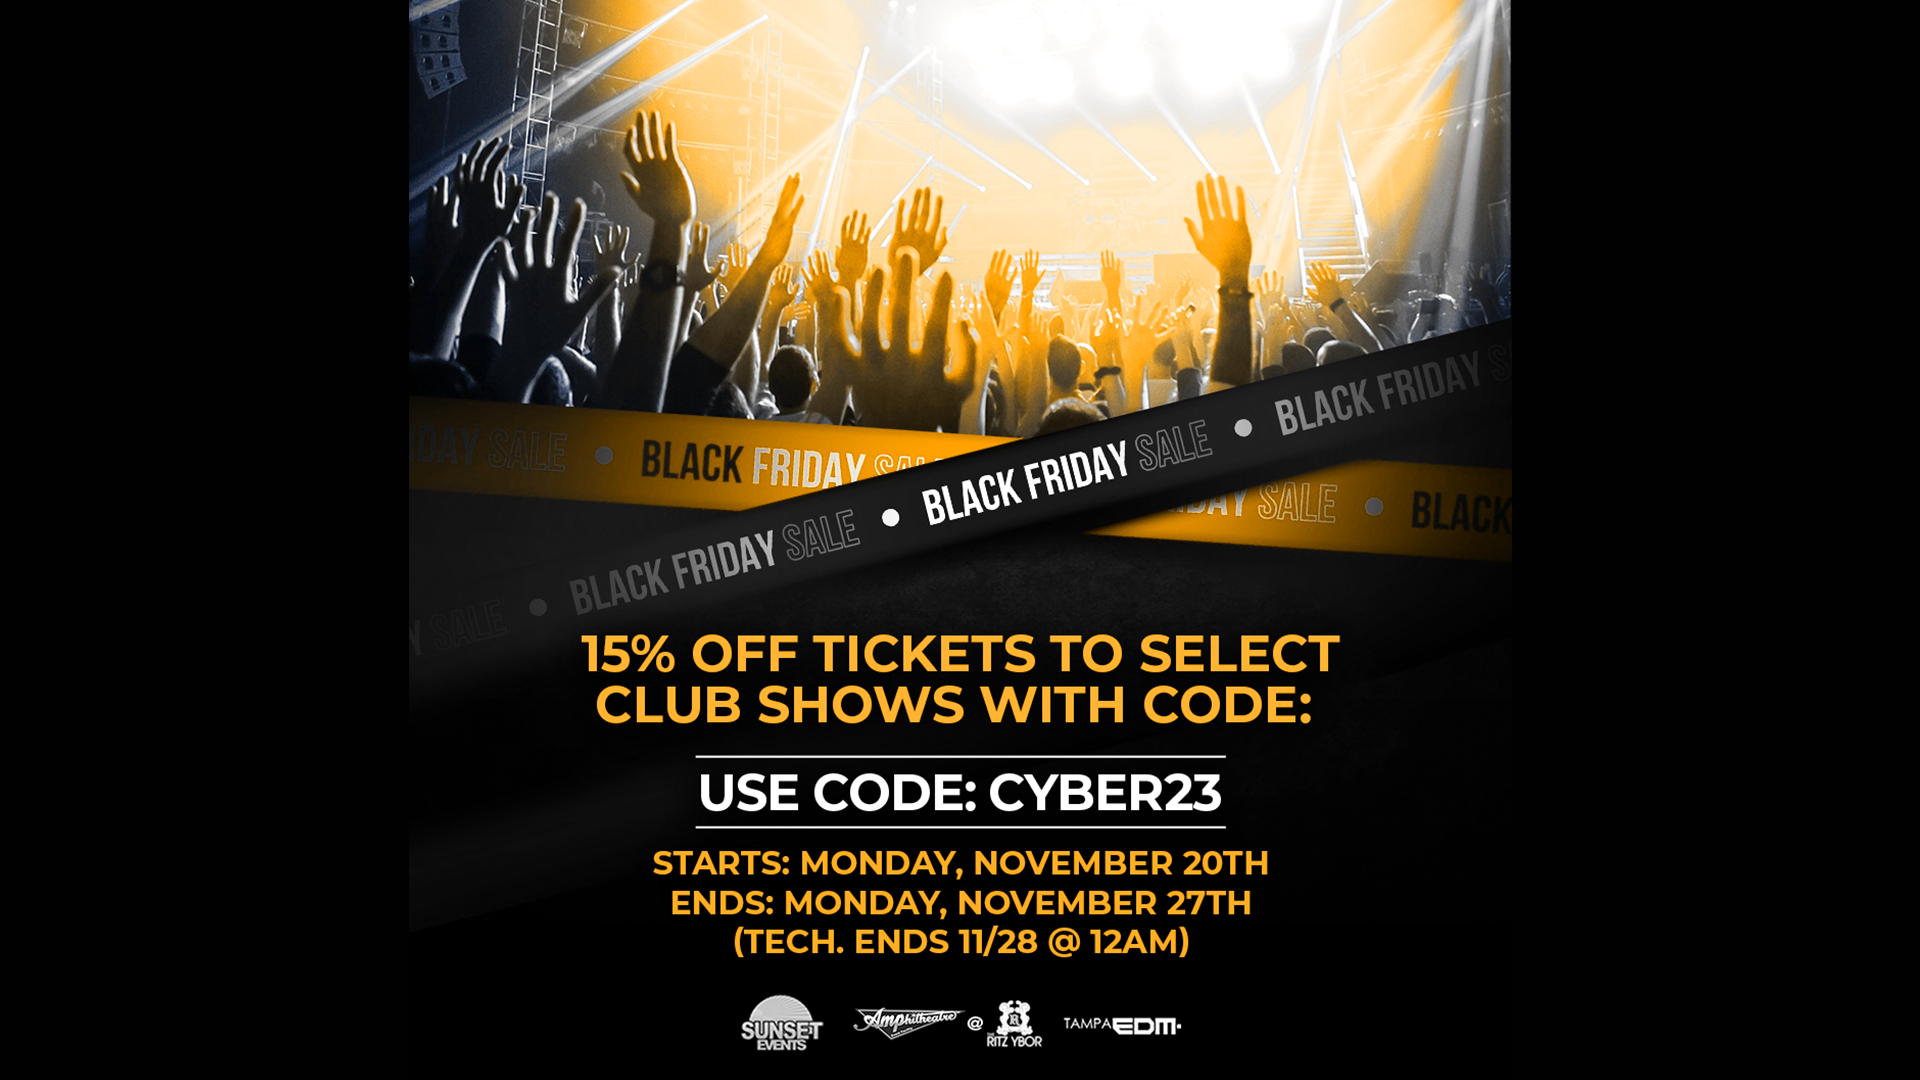 Use Code CYBER23 and SAVE on Select Club Shows for Black Friday & Cyber Monday!